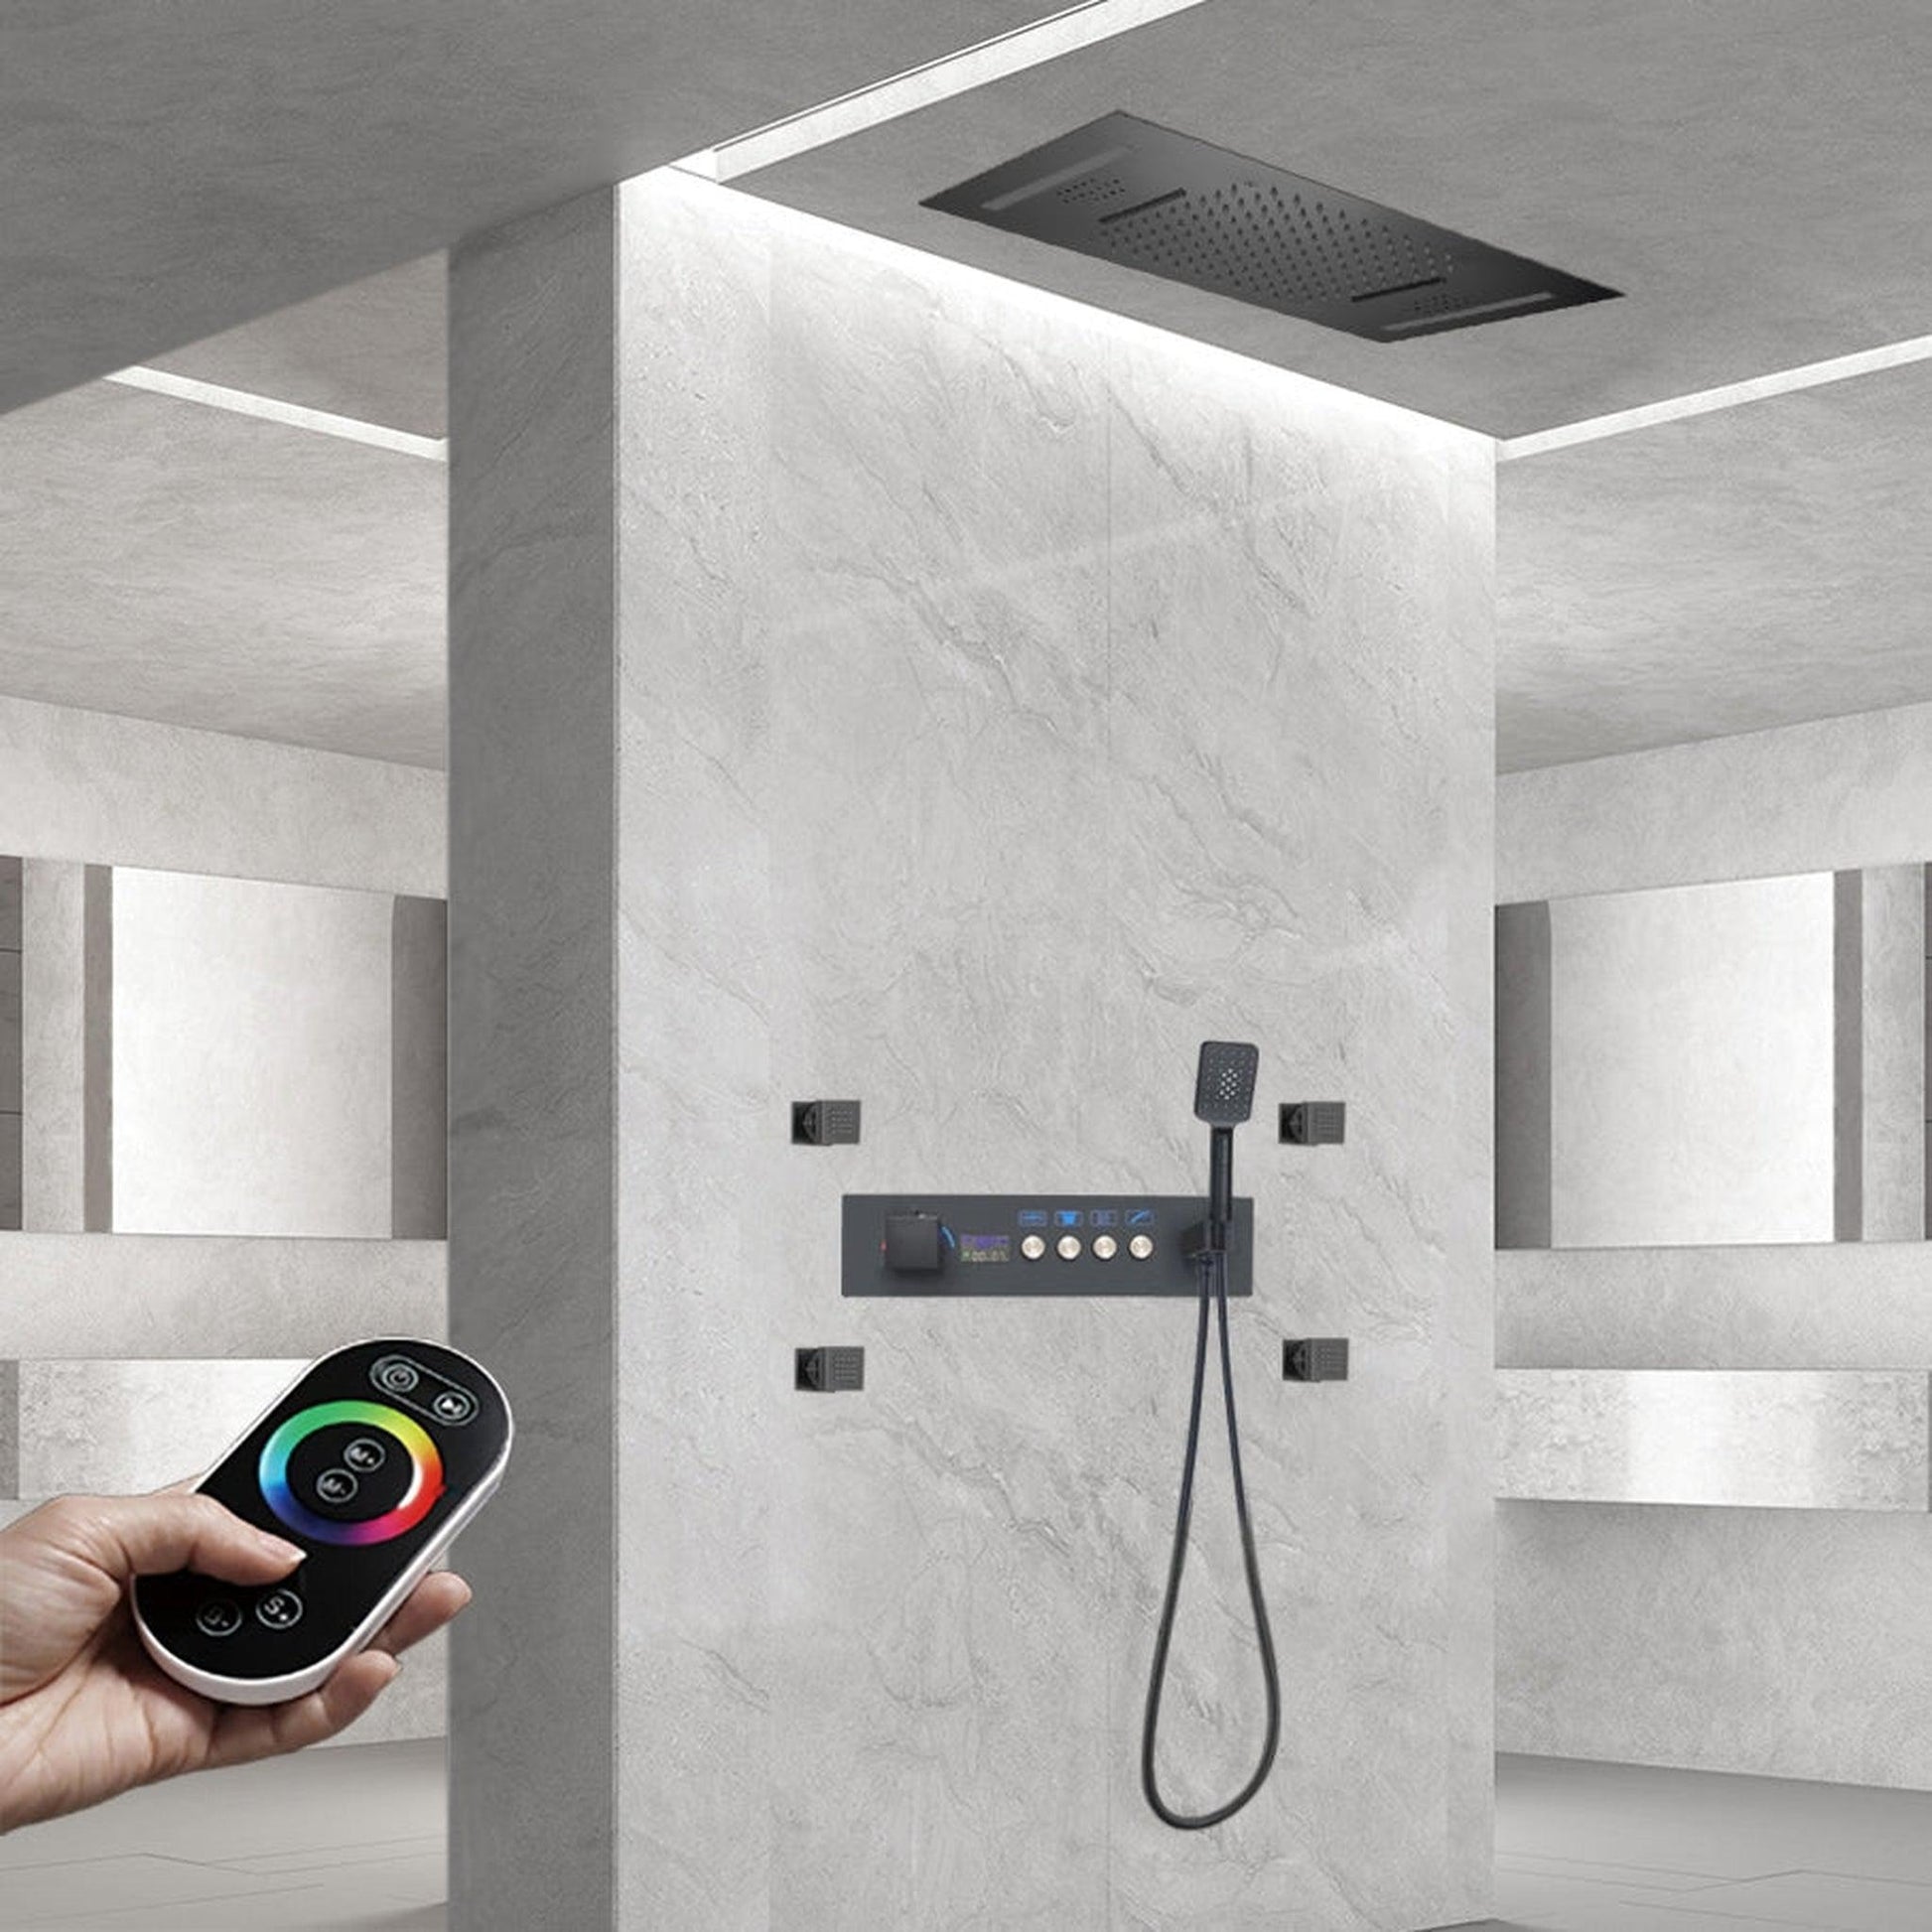 Fontana Rimini Creative Luxury Matte Black Recessed Ceiling Mounted LED Thermostatic Waterfall & Rainfall Shower System With 4-Jet Body Sprays and Hand Shower